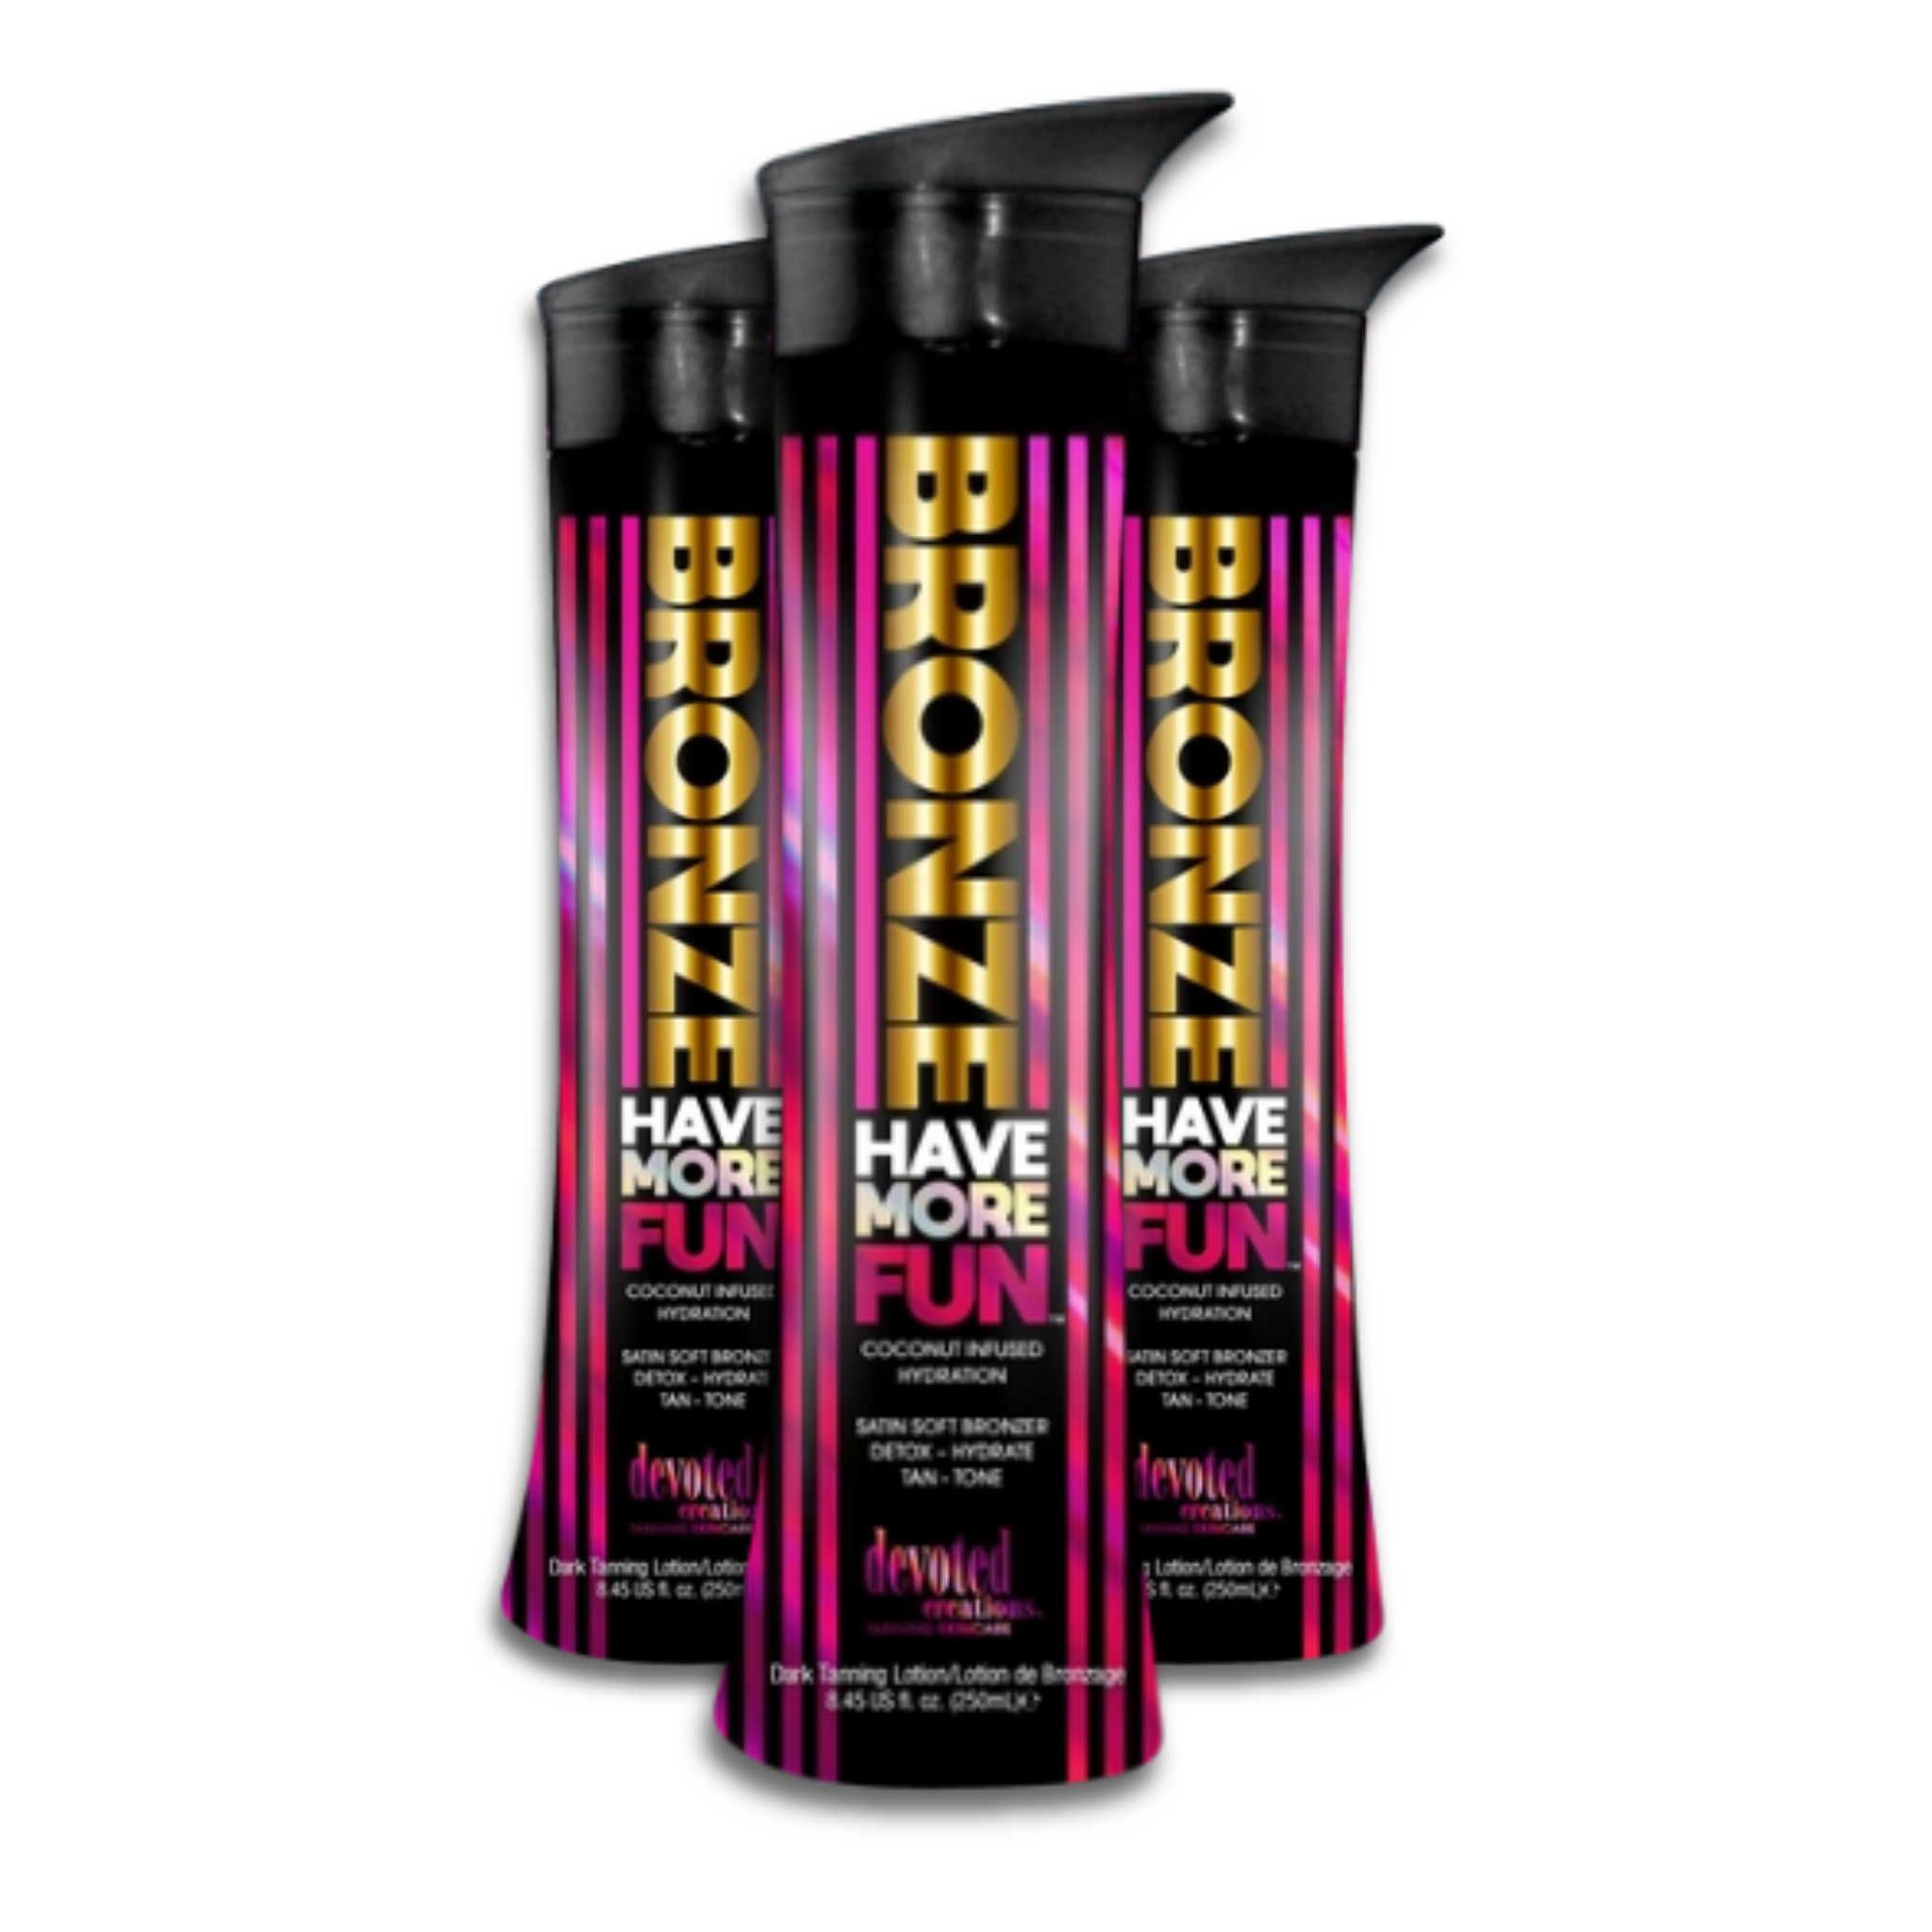 Devoted Creations Bronze Have More Fun Tanning Lotion Discount Packs